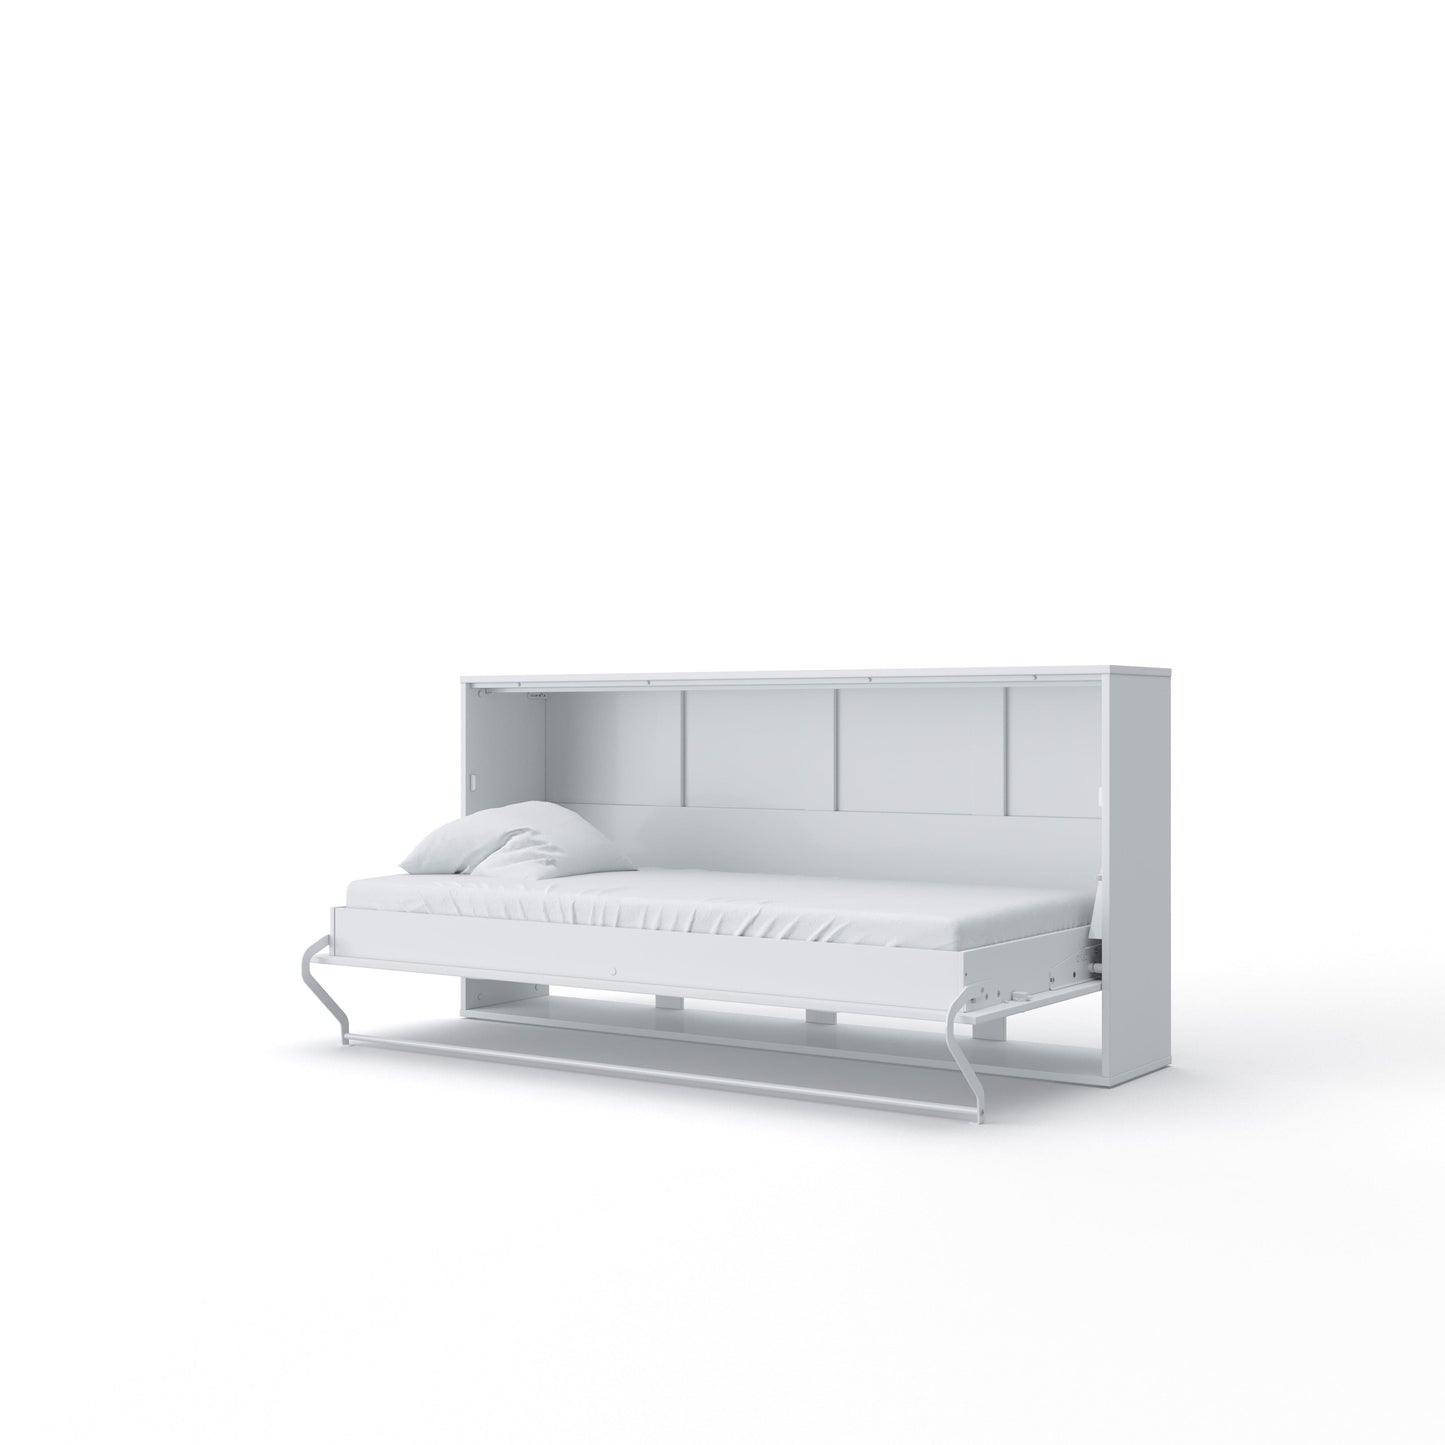 Maxima House Maxima House Invento Horizontal Wall Bed, European Twin Size with a cabinet on top